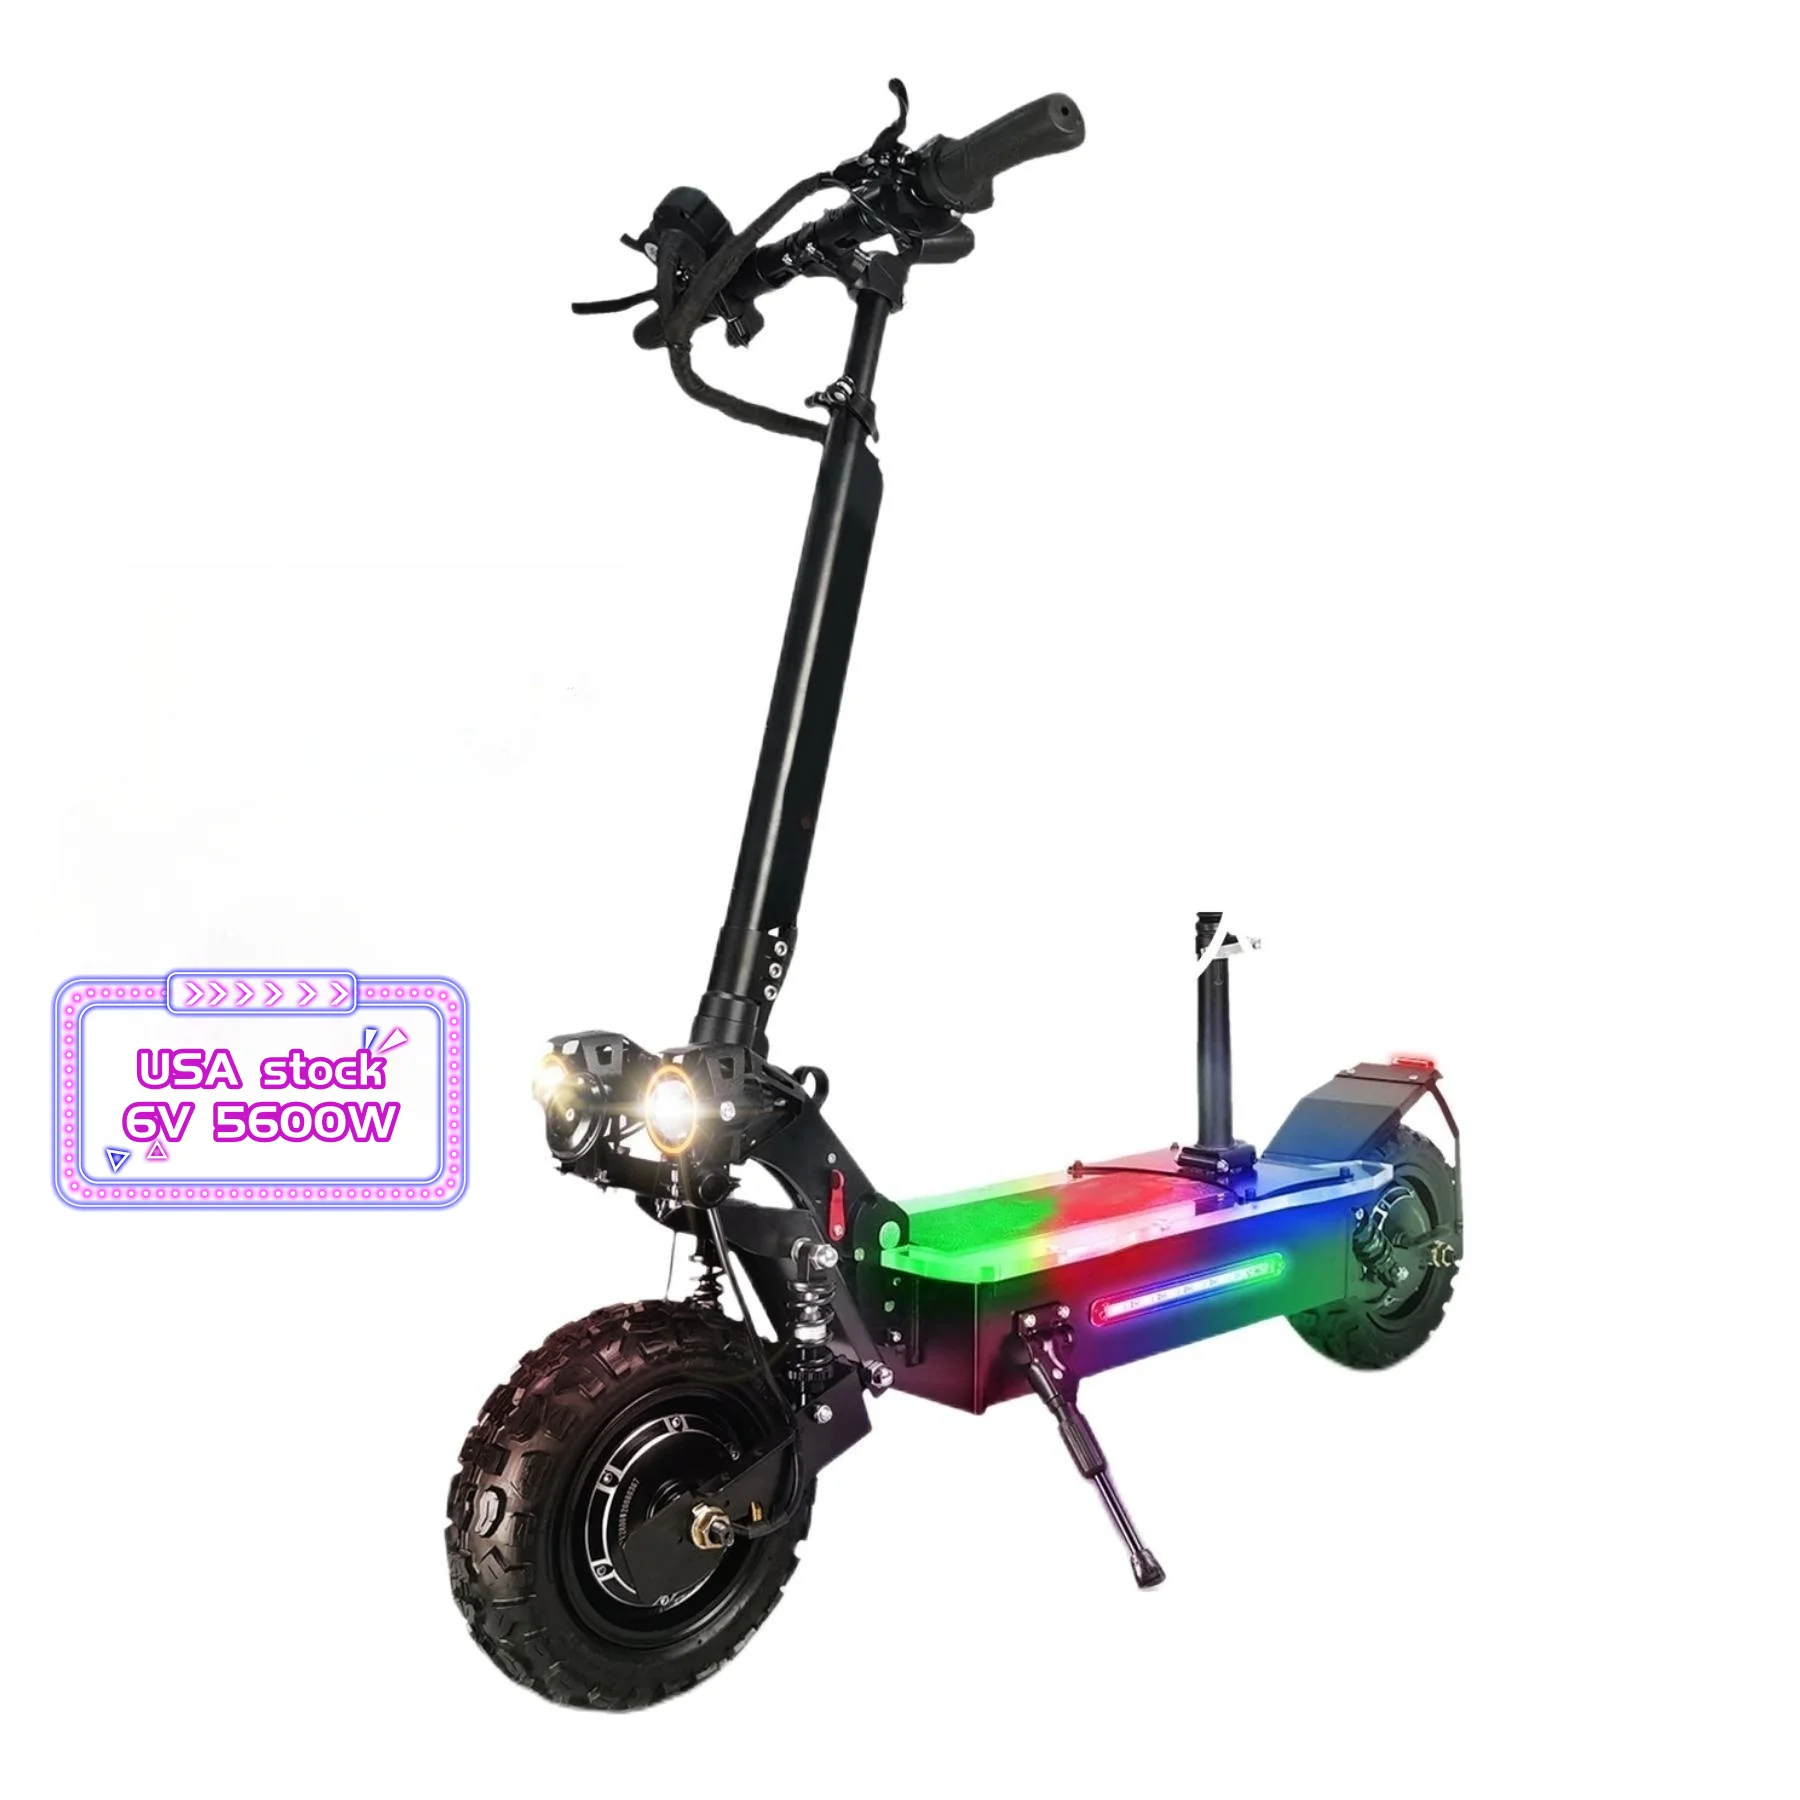 

Hot selling USA warehouse foldable 60V 5600w 11inch off road tire hub motor adults electric scooter for outdoor sports